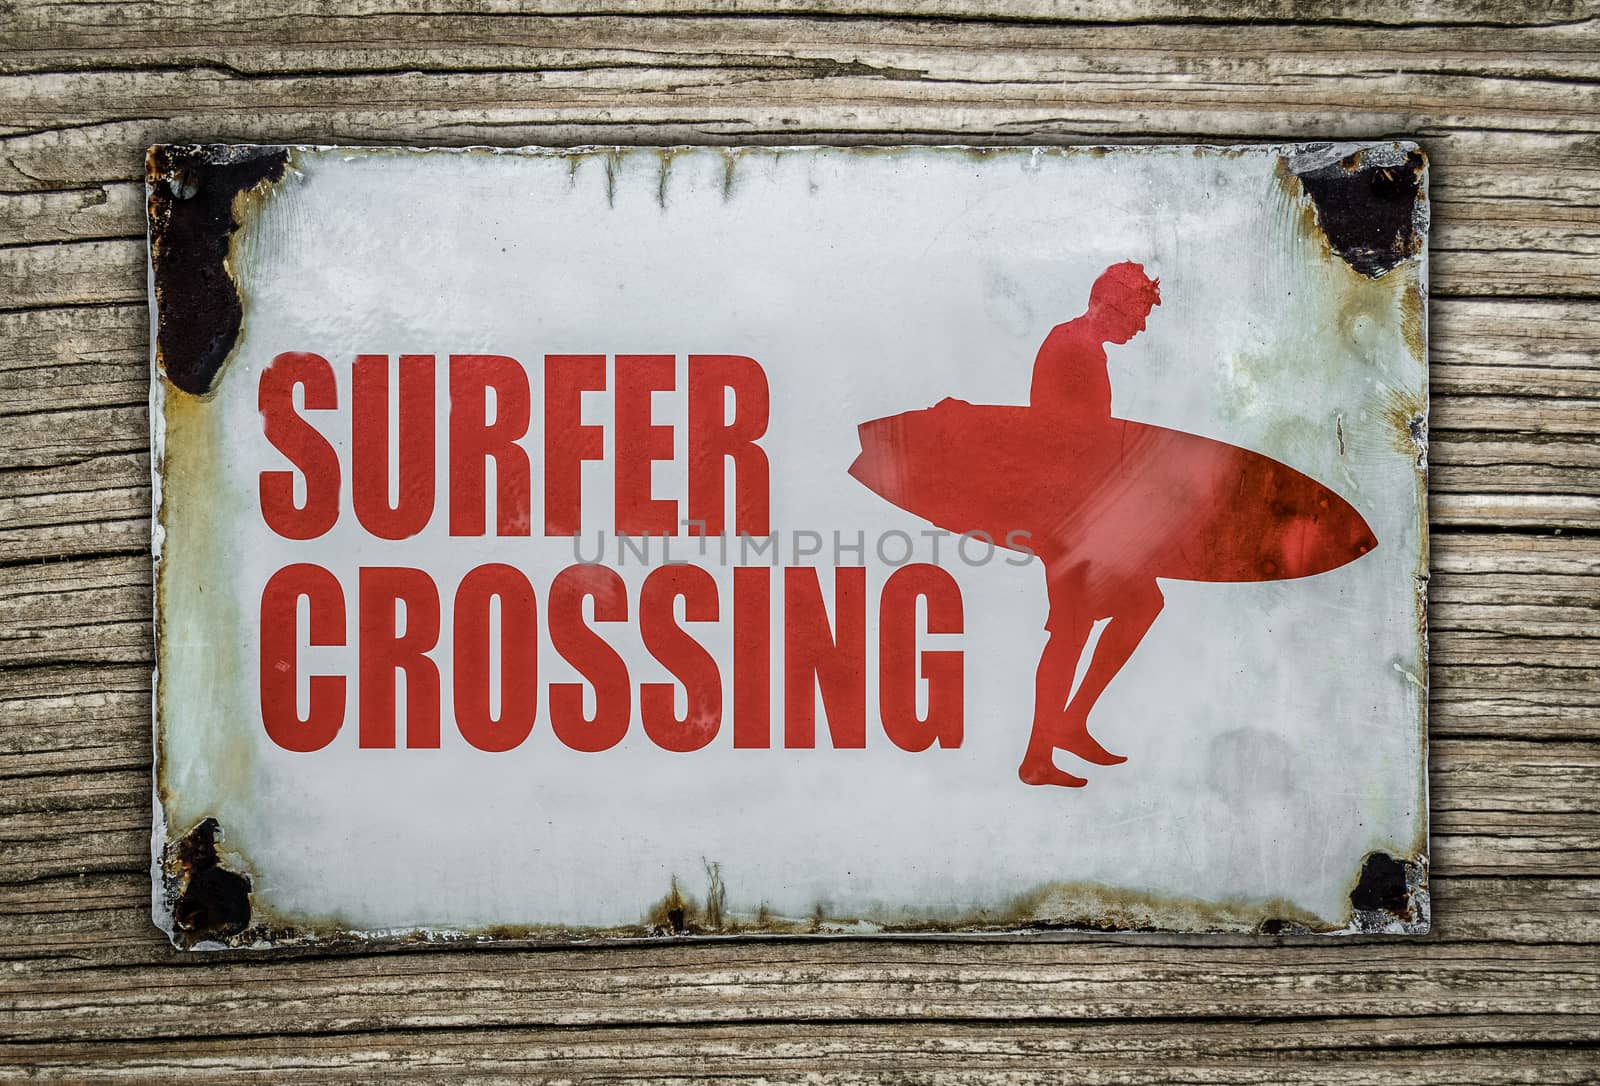 Vintage Red Retro Surfer Crossing Warning Sign On Wooden Background In Hawaii